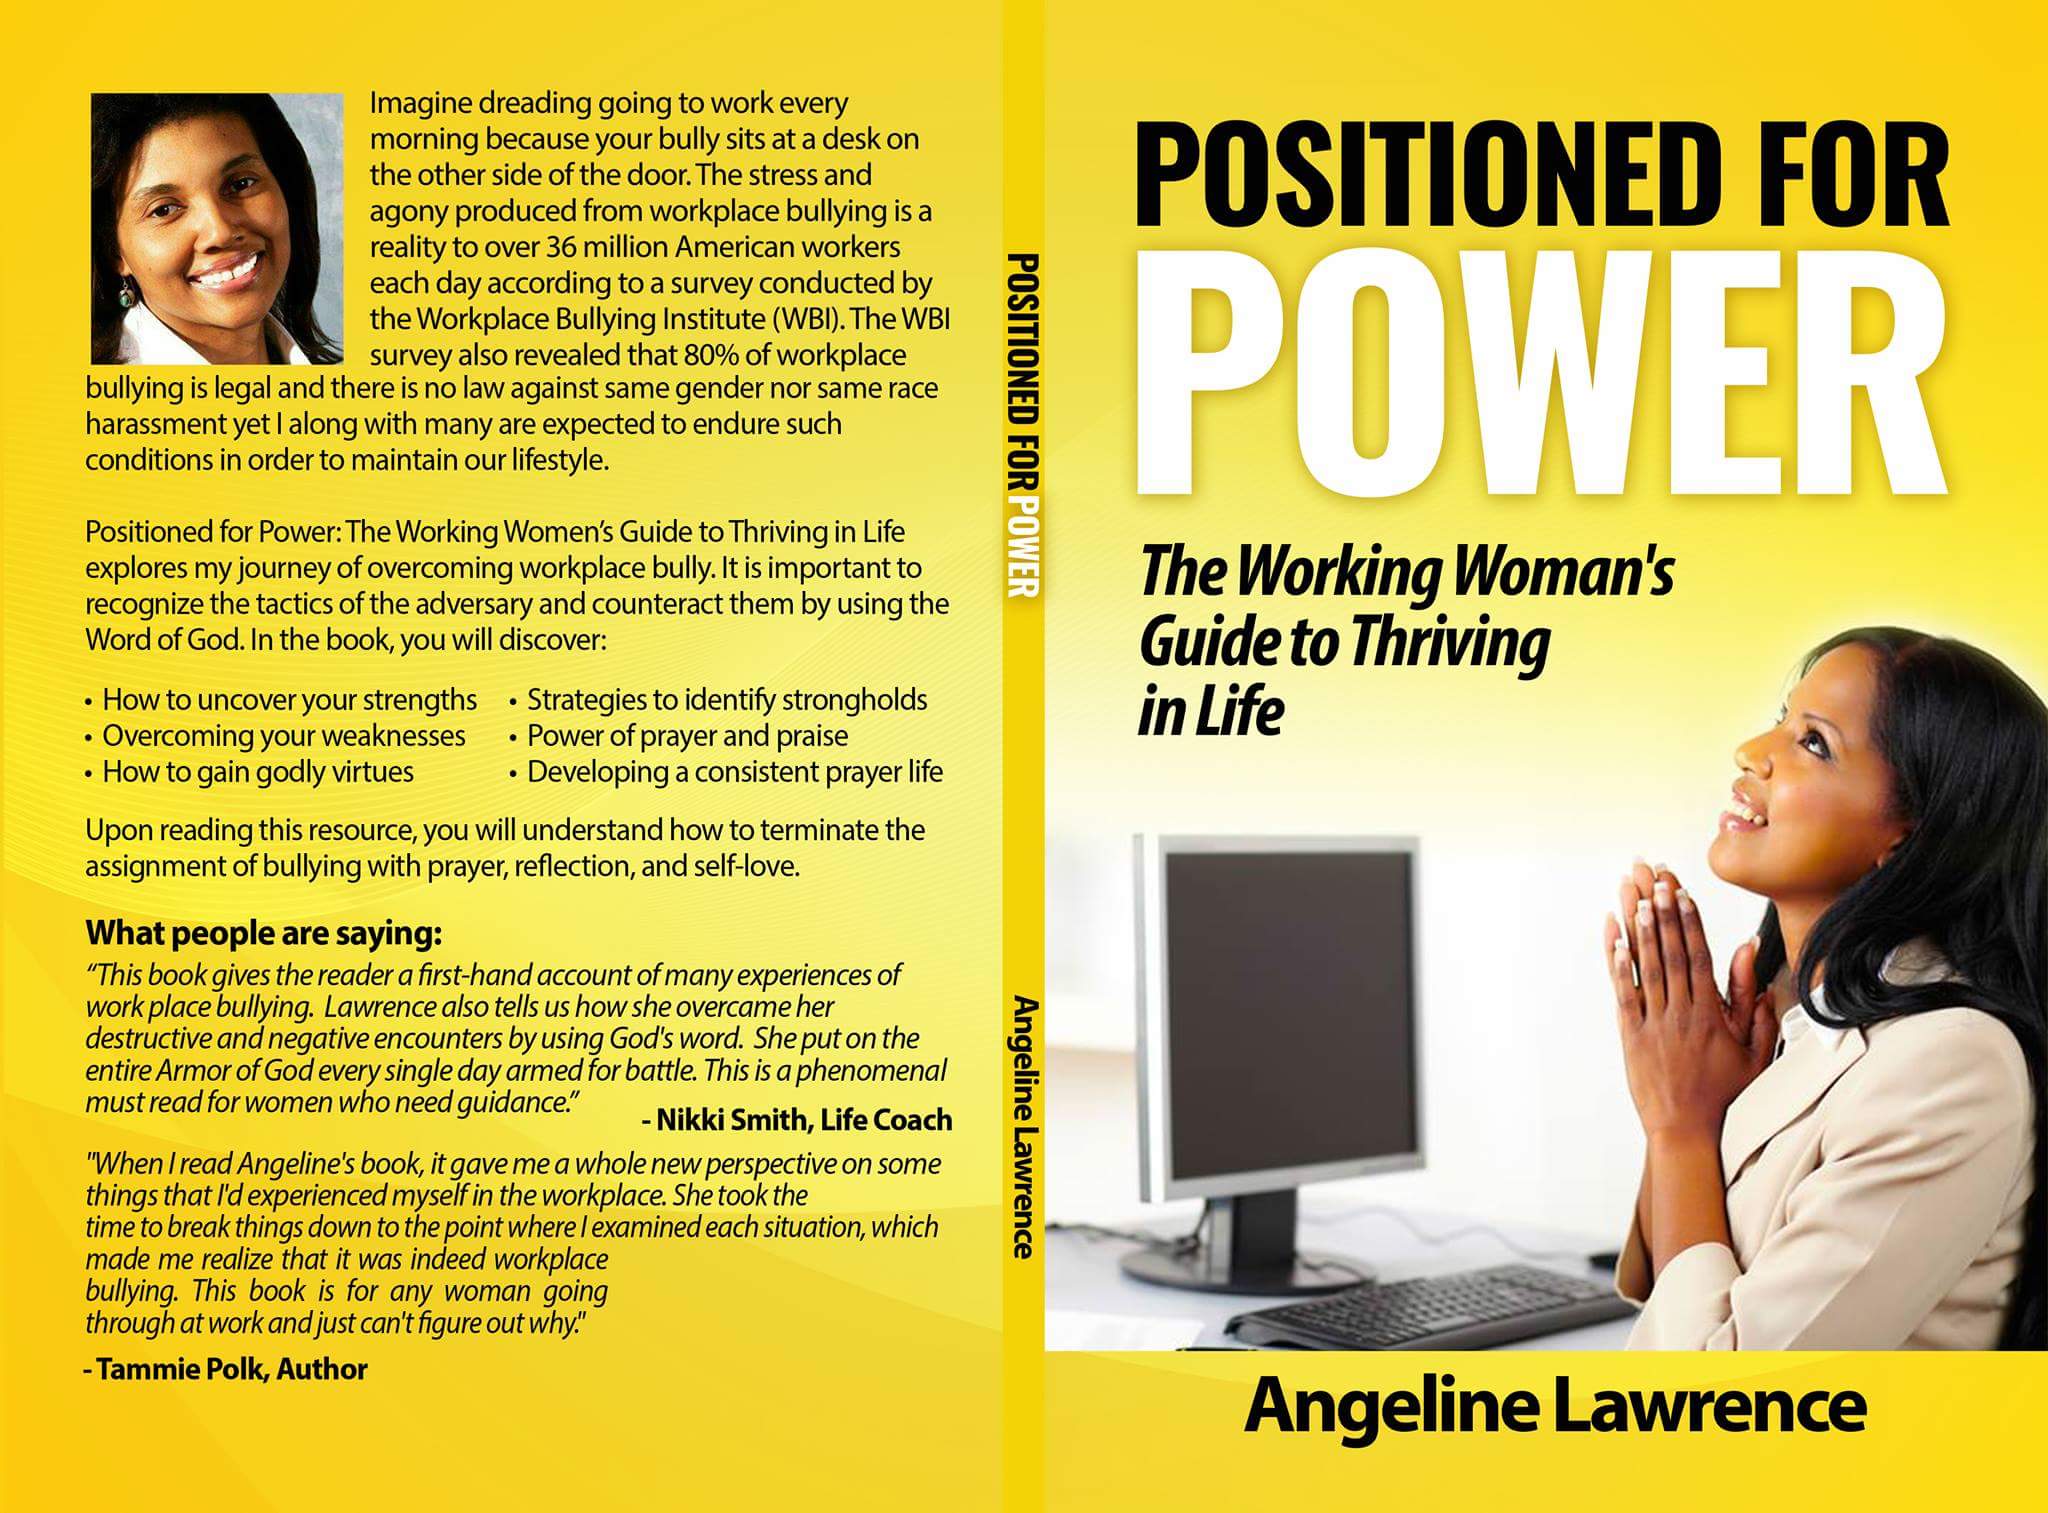 Positioned For Power: The Working Woman’s Guide to Thriving In Life